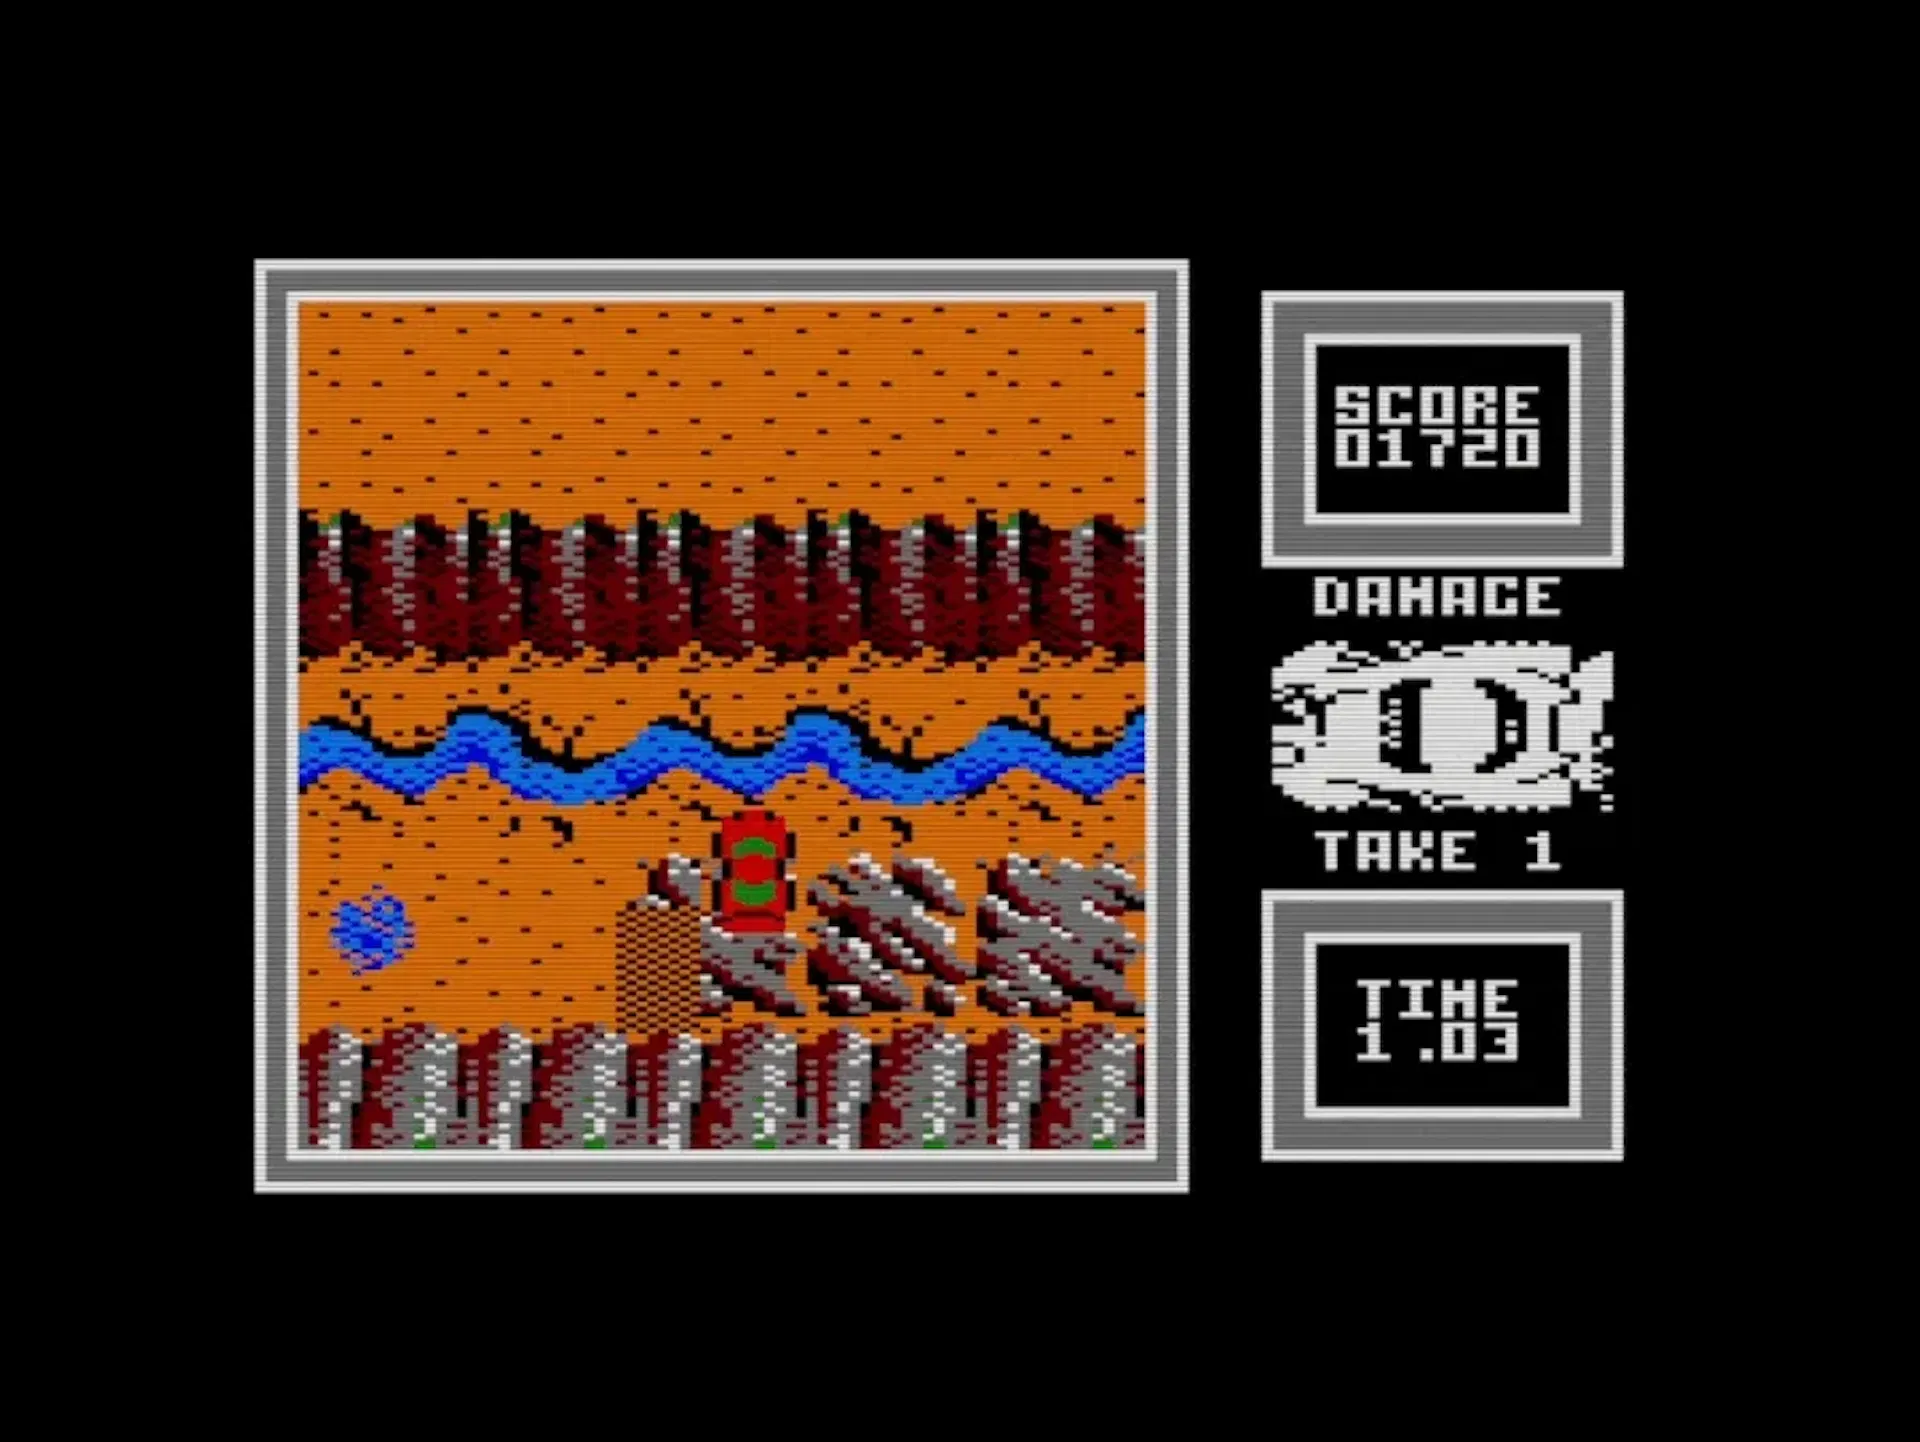 Amstrad CPC version - more colourful but a smaller gameplay window (common for CPC games, to speed up gameplay).